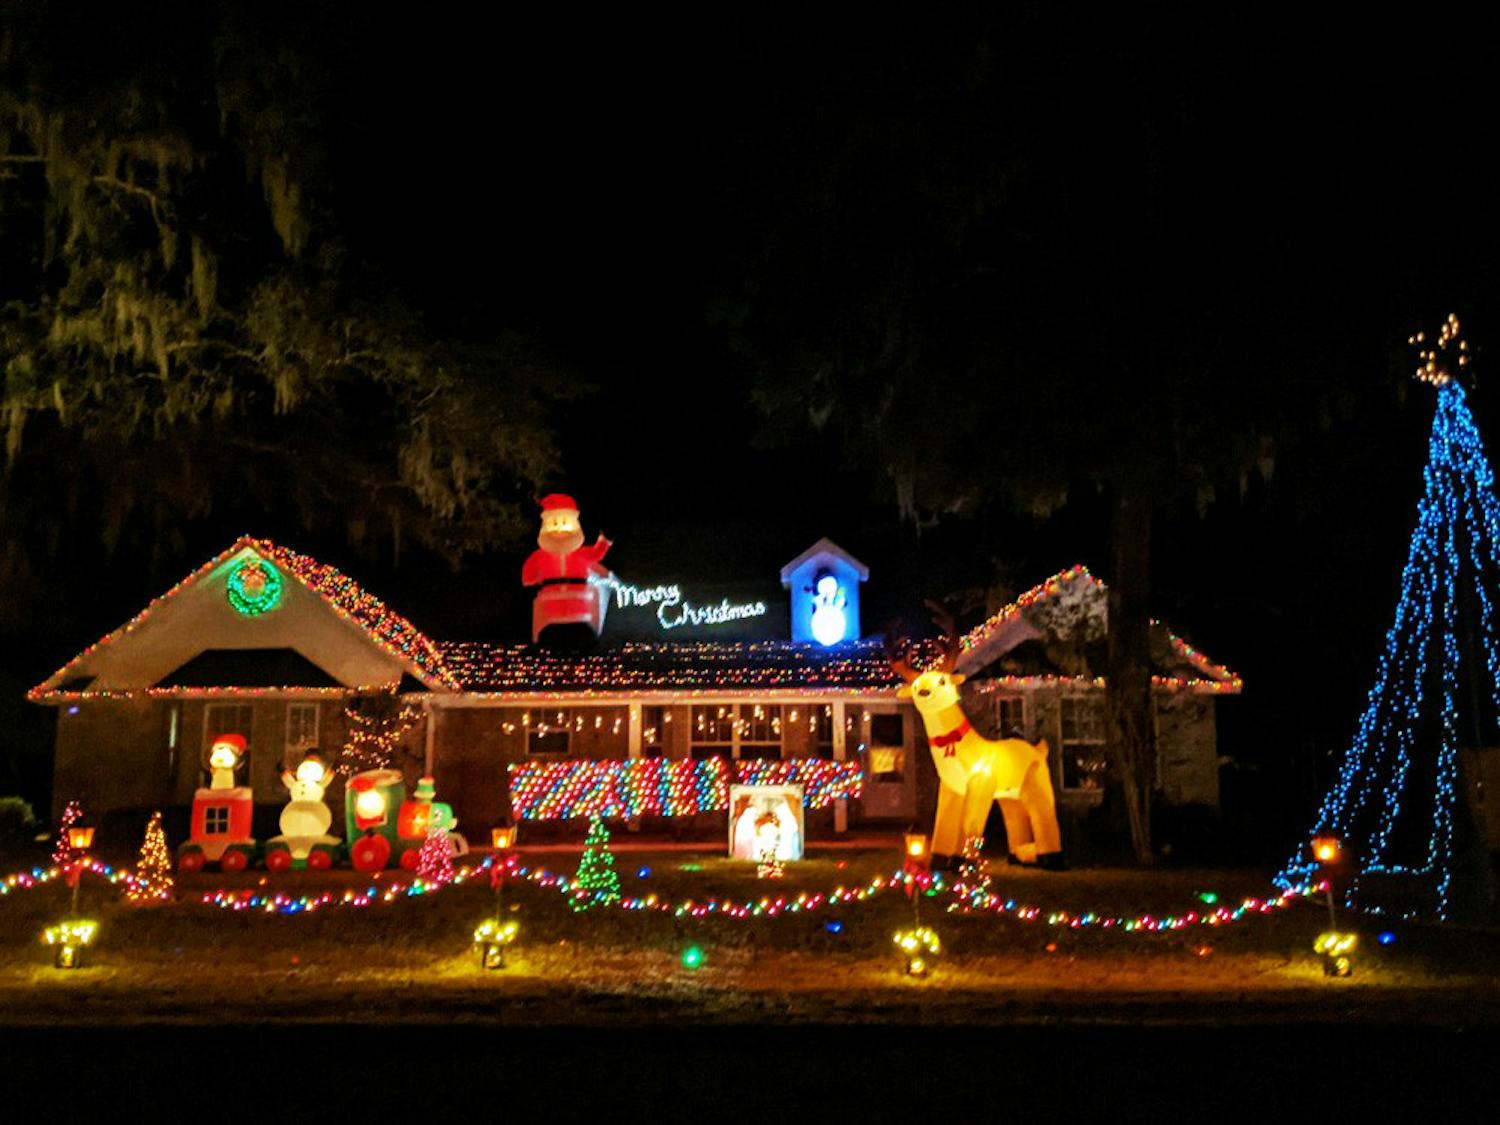 Logan Euler, 19, runs a light show at his dad&#x27;s house in Newberry, Fla. Starting Dec. 3, 2020, cars can tune into a radio station as they drive by to hear the curated music and messages from the show every night  from 6-9 p.m. Sunday-Thursday and 6 p.m. to 12 a.m. on Fridays and Saturdays. 